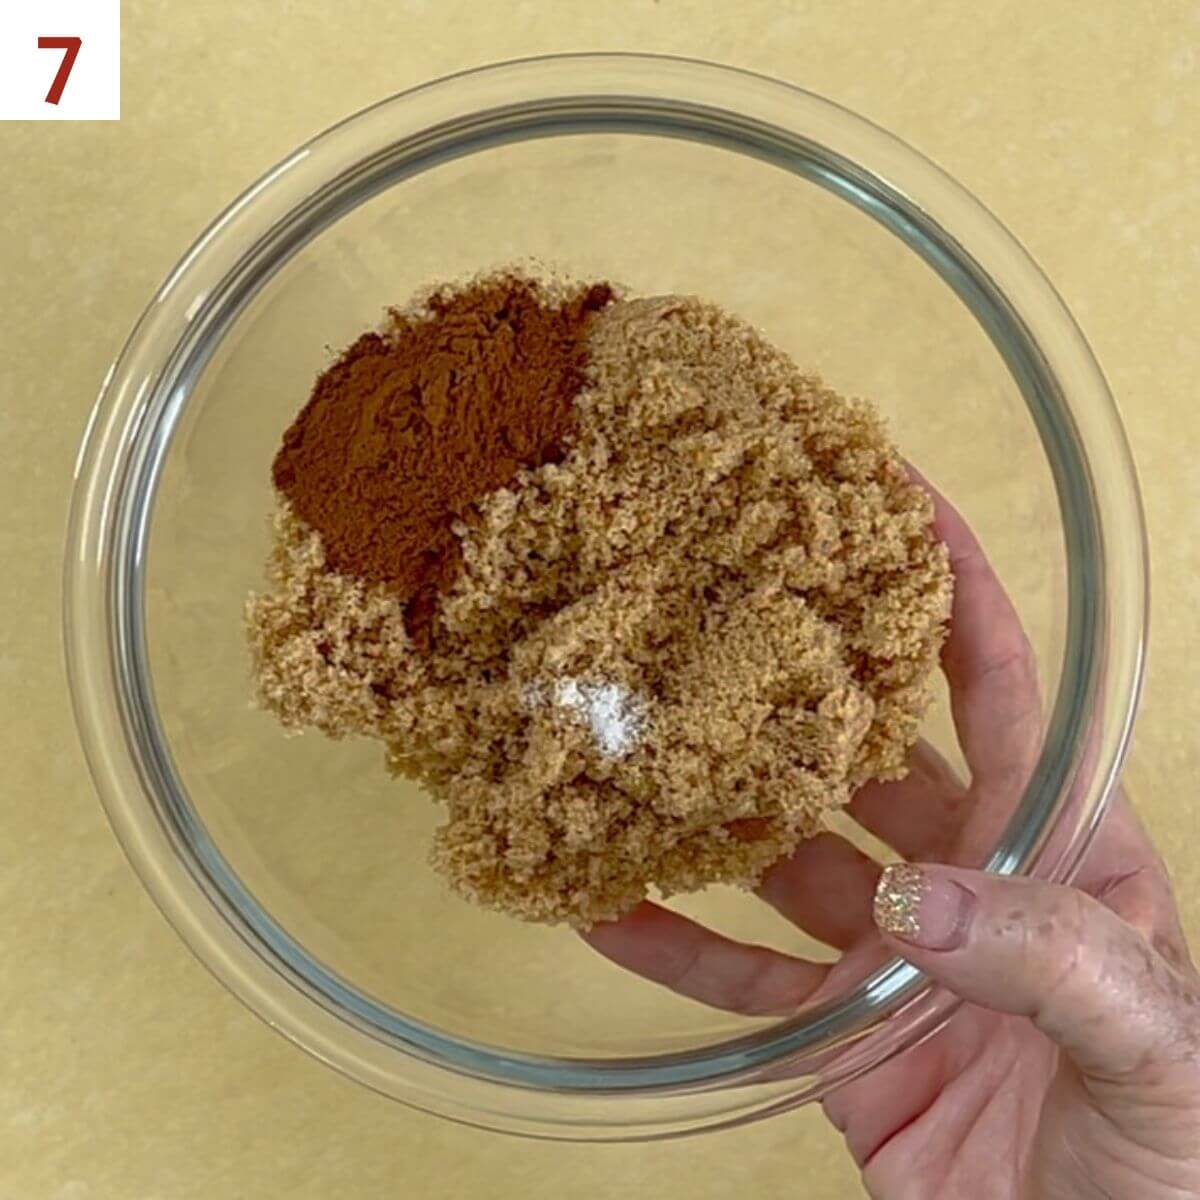 Mixing brown sugar, cinnamon, and salt in a glass bowl.